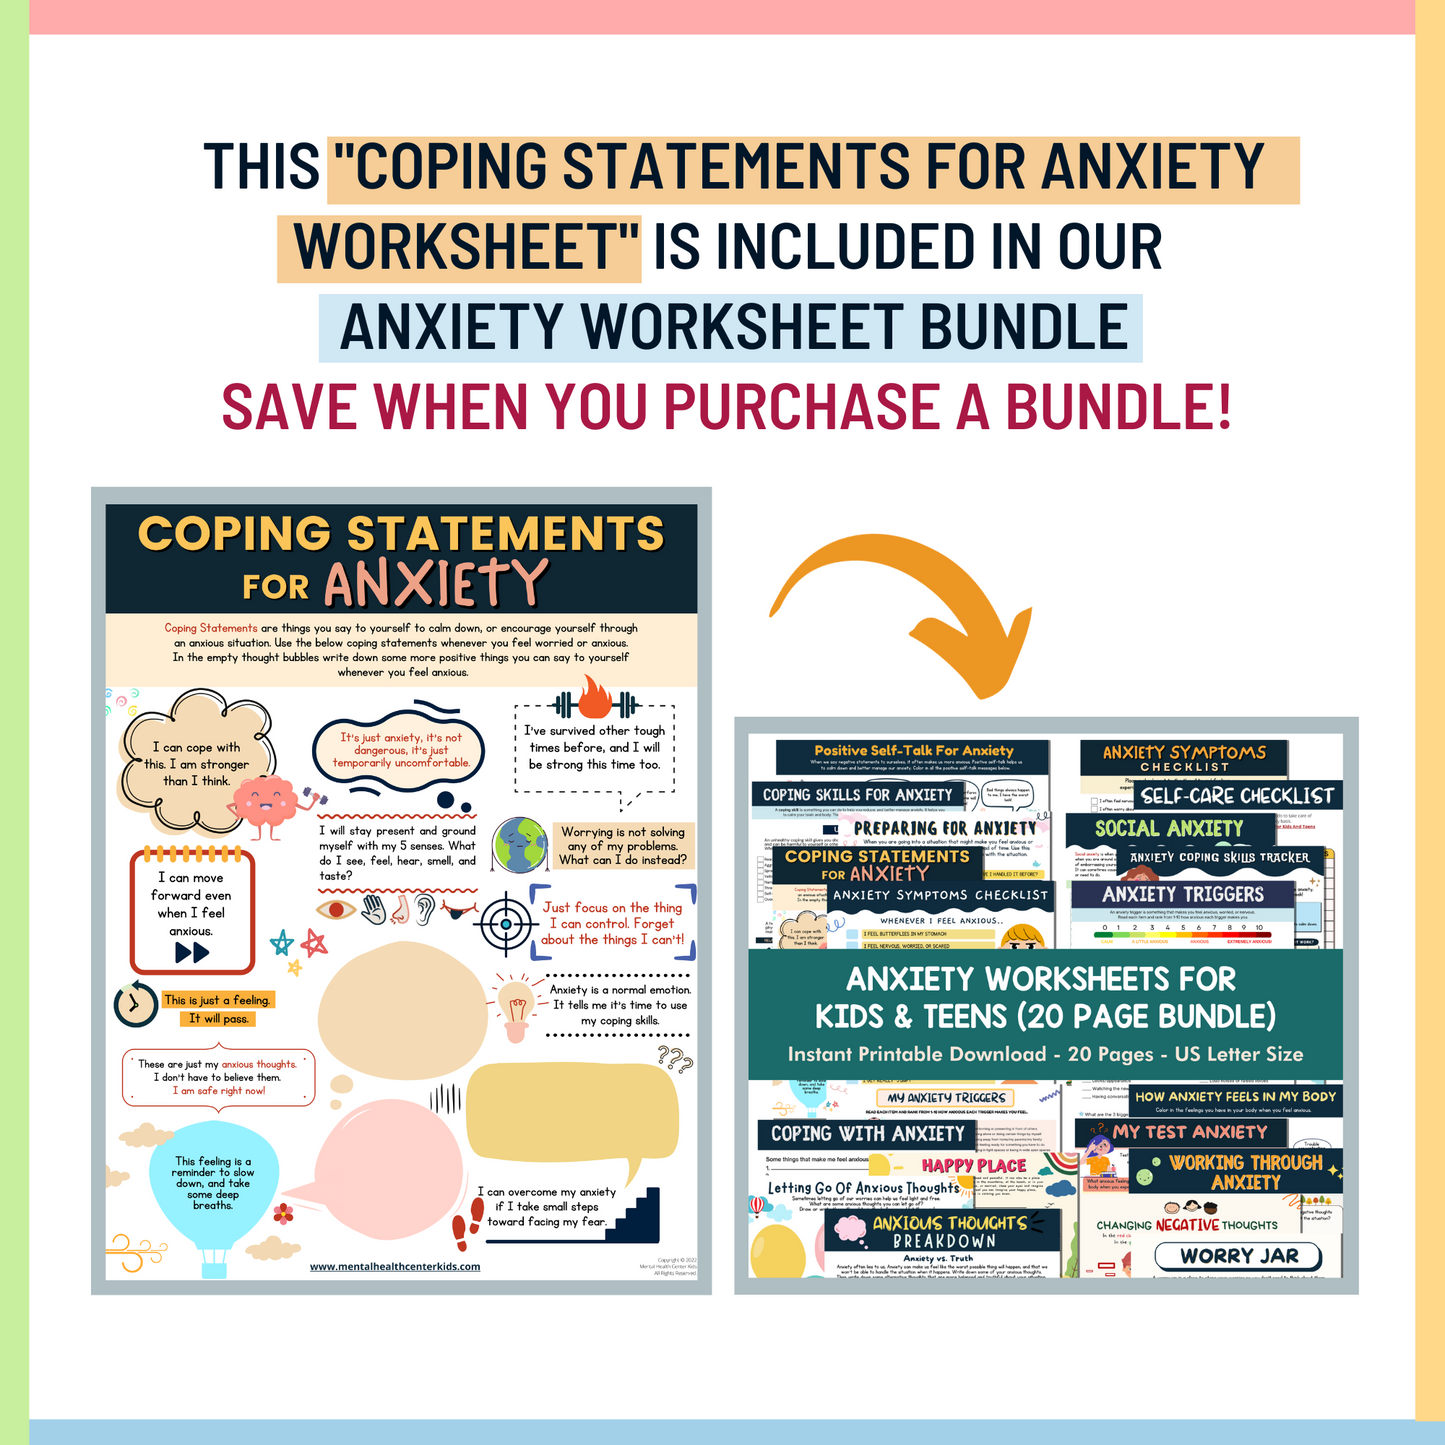 Coping Statements for Anxiety